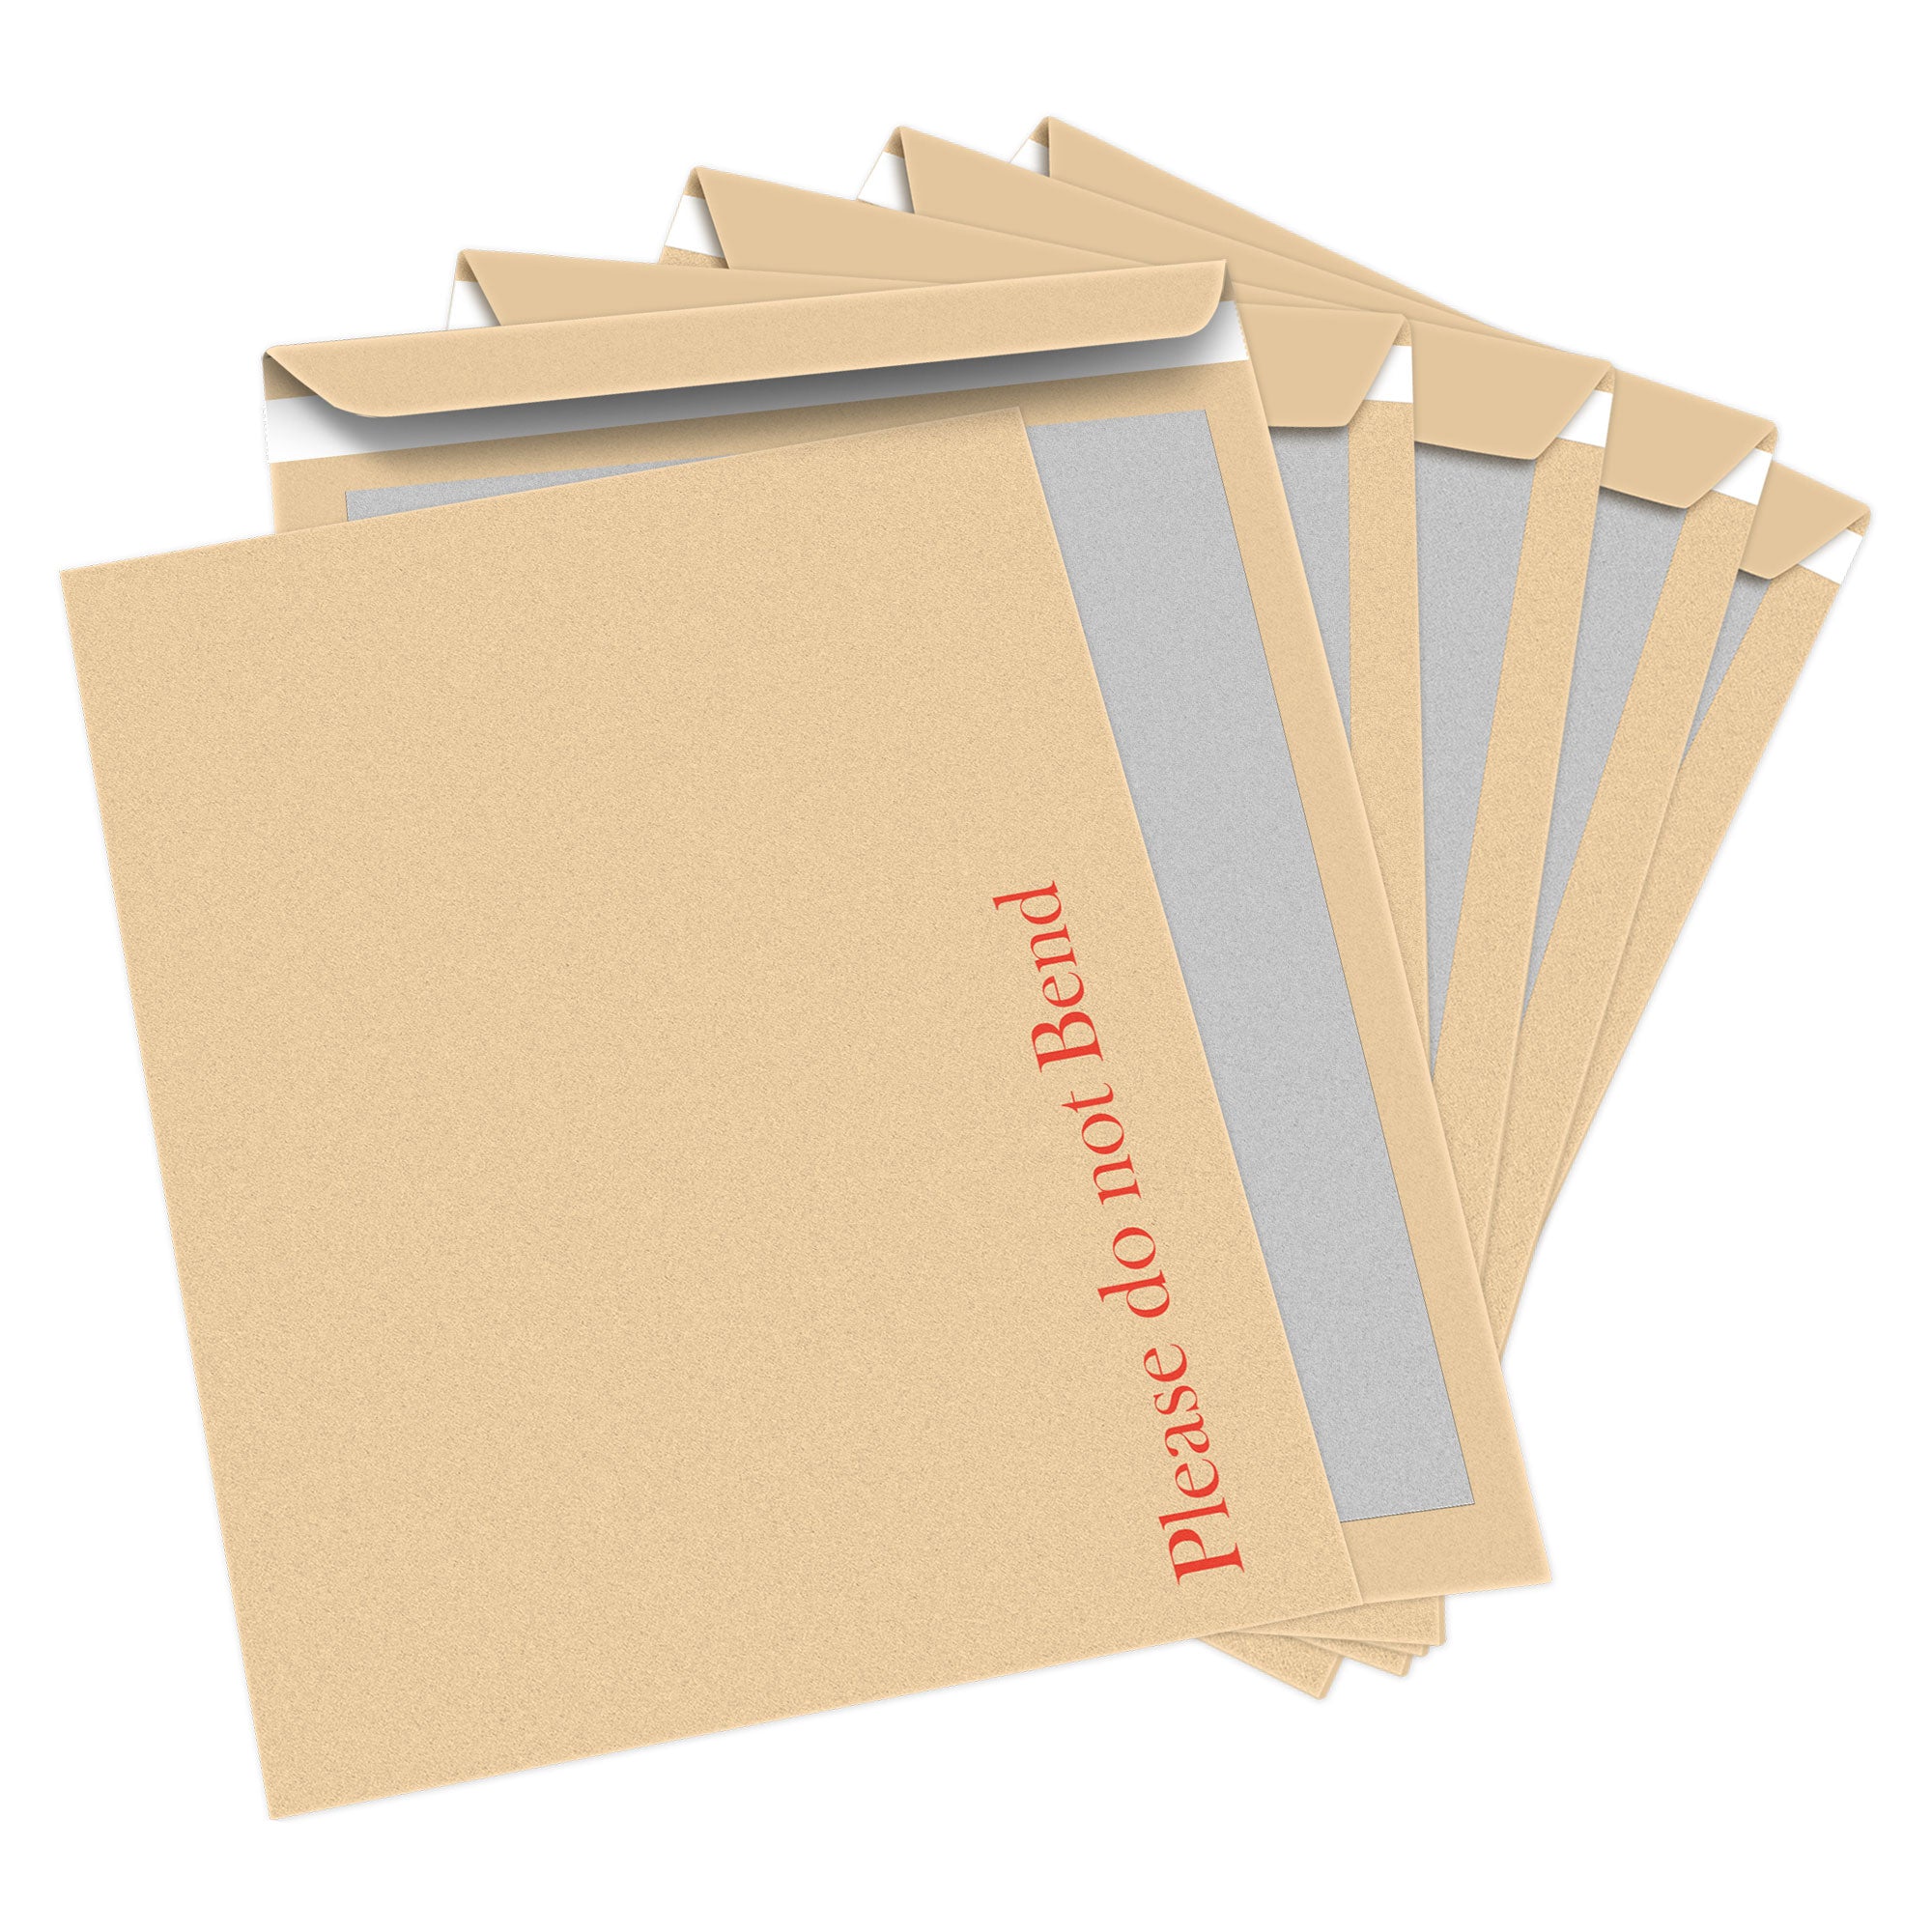 iSoul A3 / A4 / A5 / A6 Do Not Bend Envelopes Manila Hard Board Backed 20 Packs